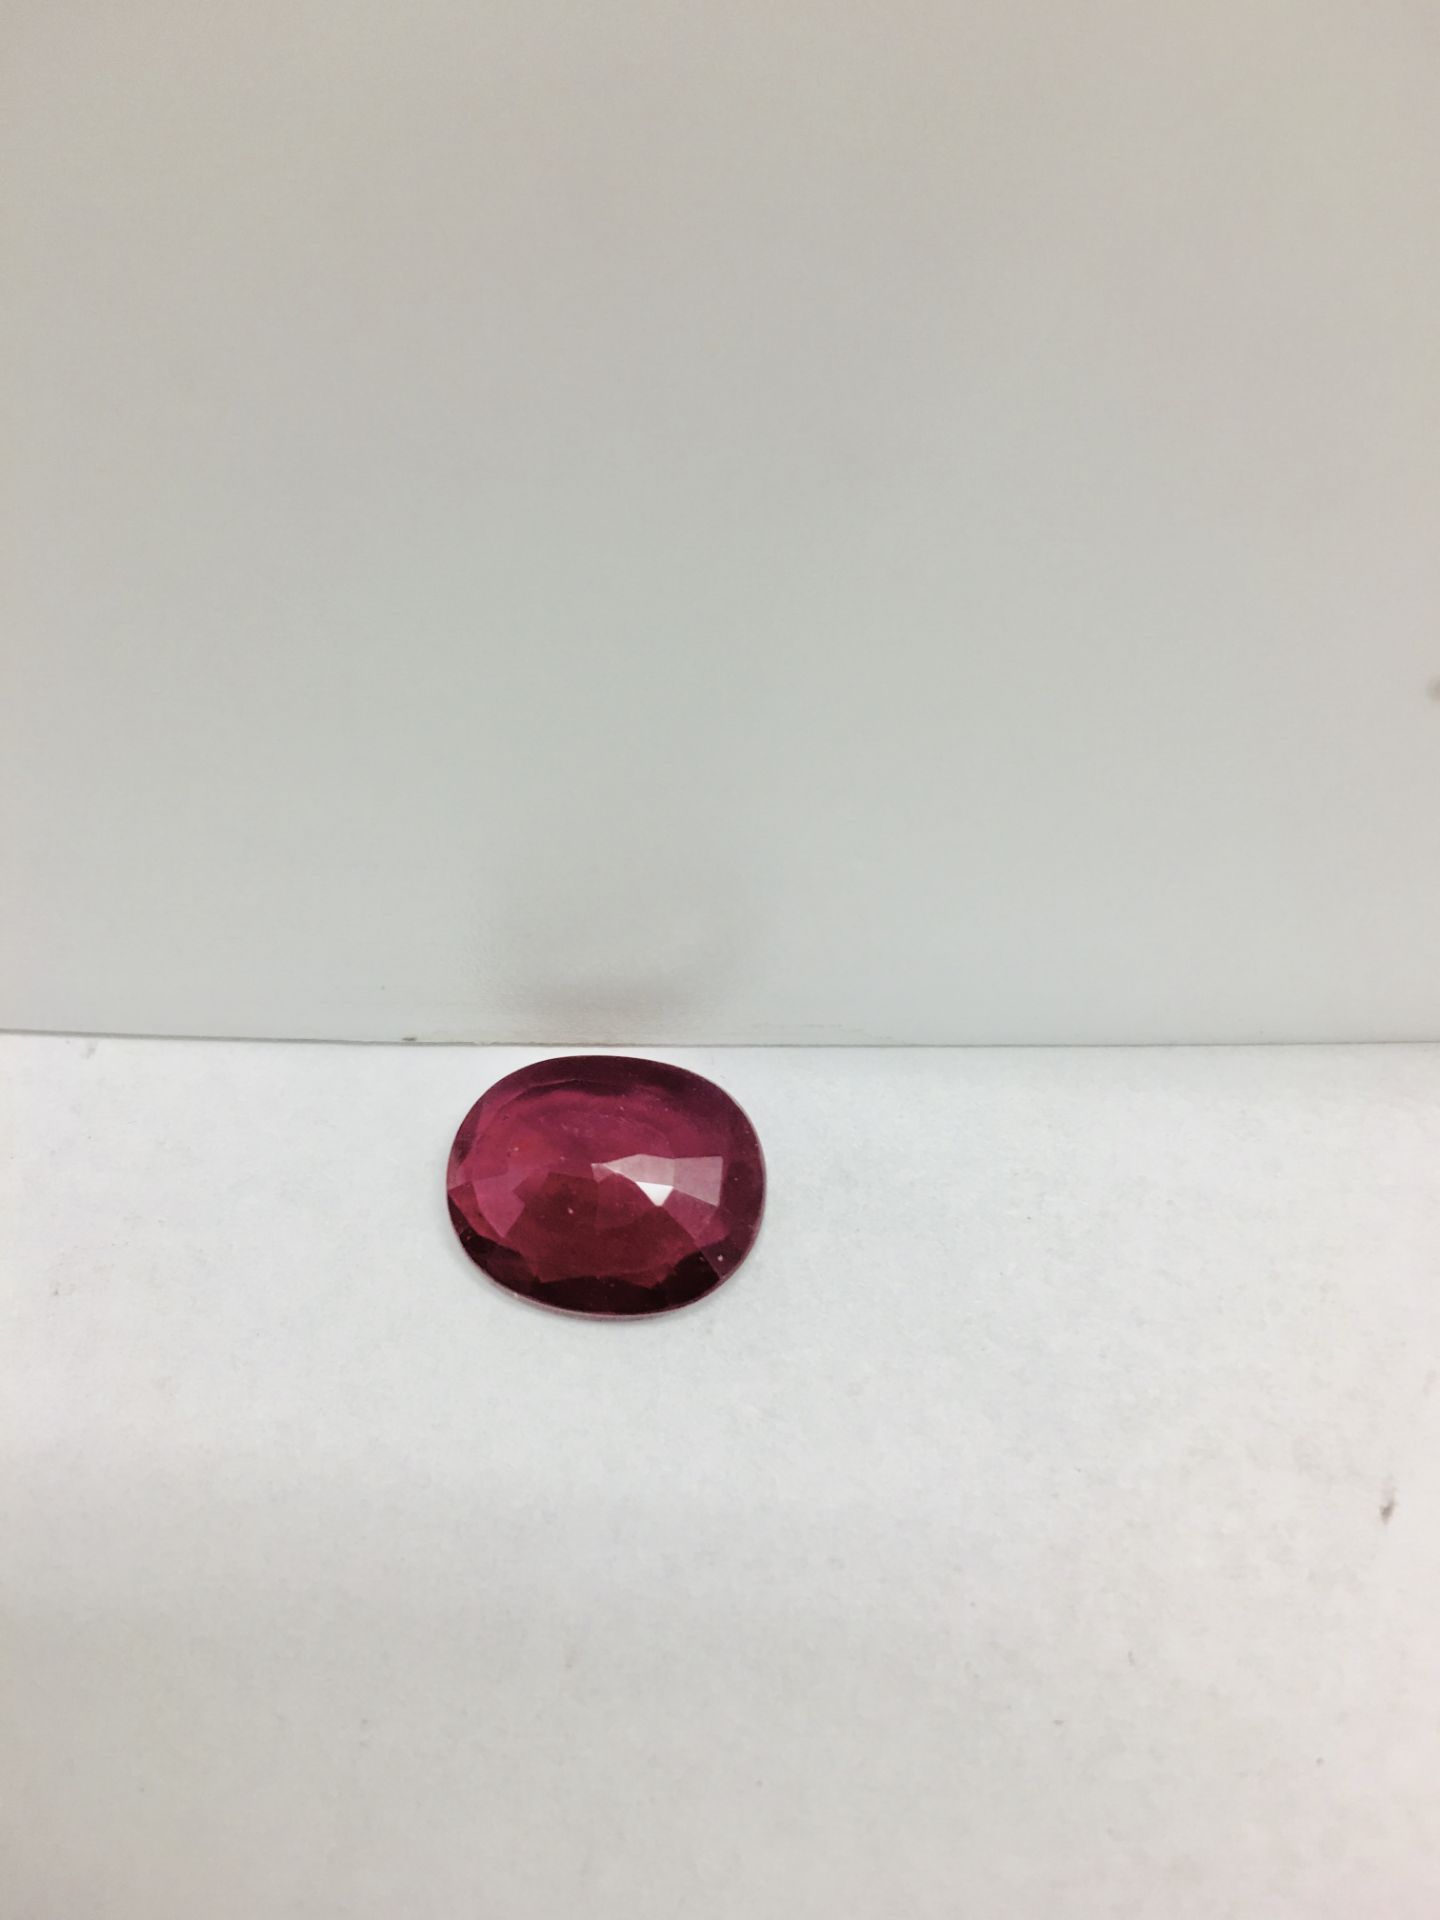 4.41ct ruby,Enhanced by Frature,good clarity and colour,12mmx10mm ,valued at 800 - Image 3 of 4